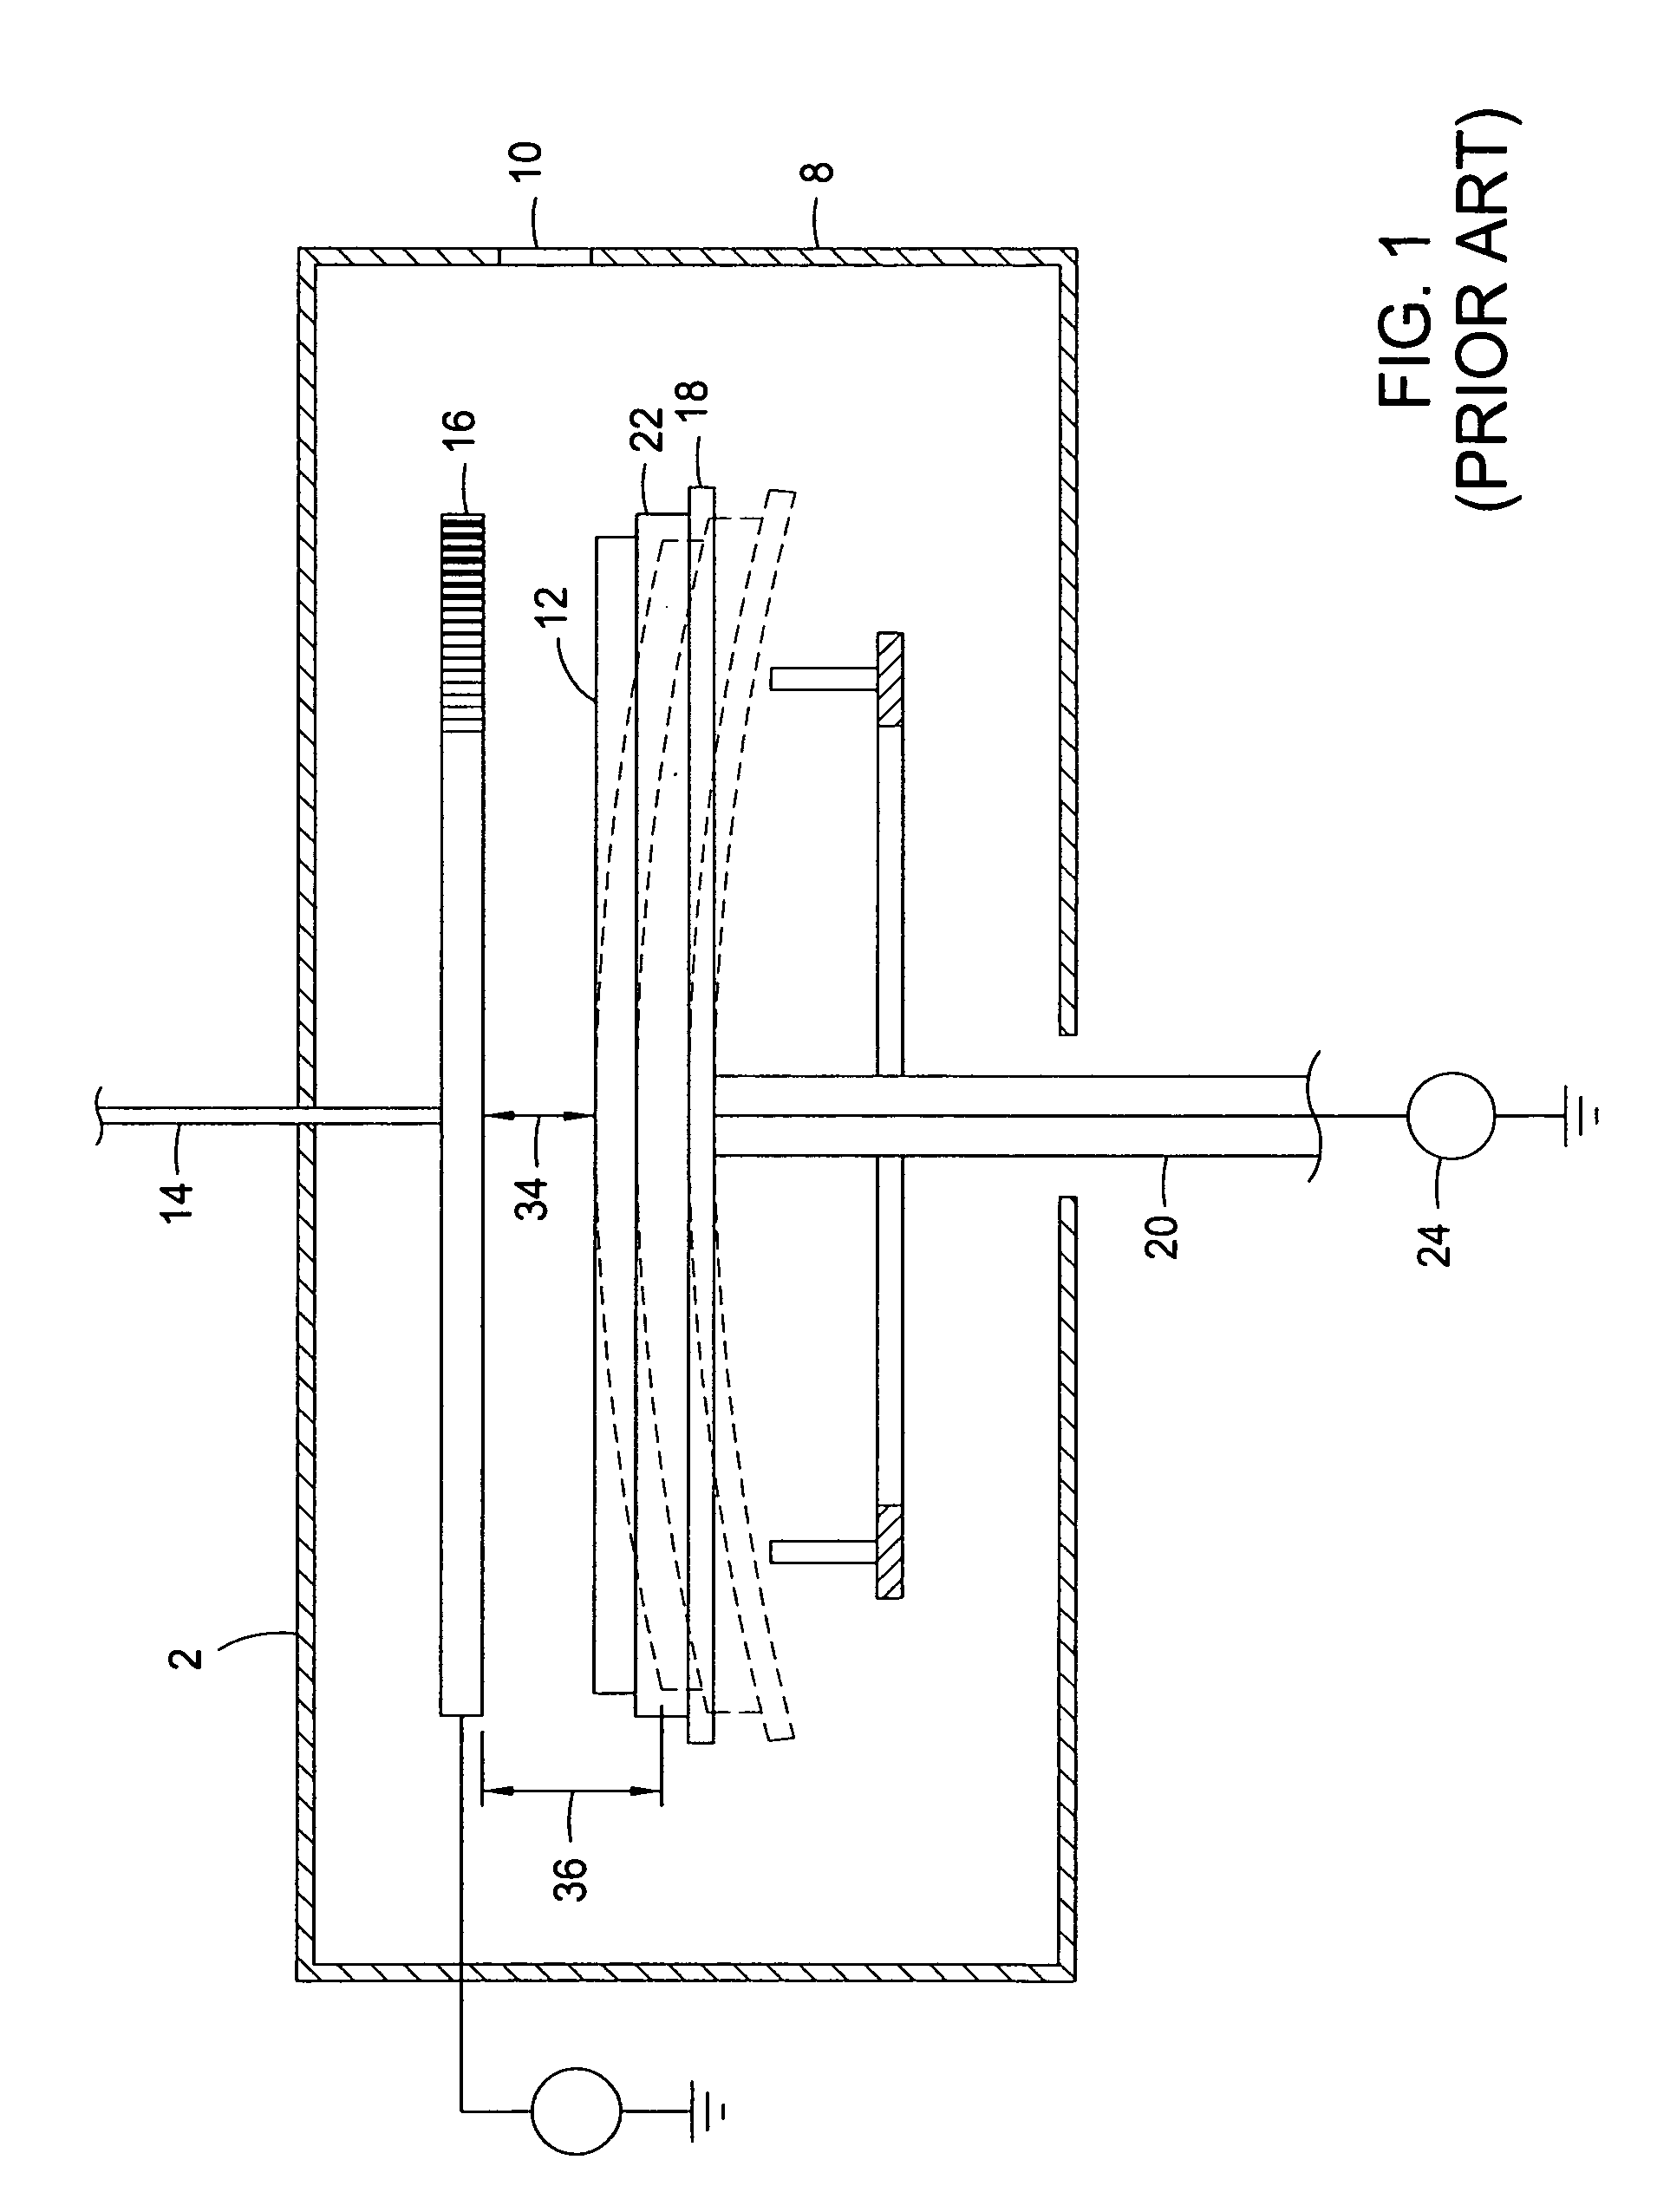 Active cooling substrate support